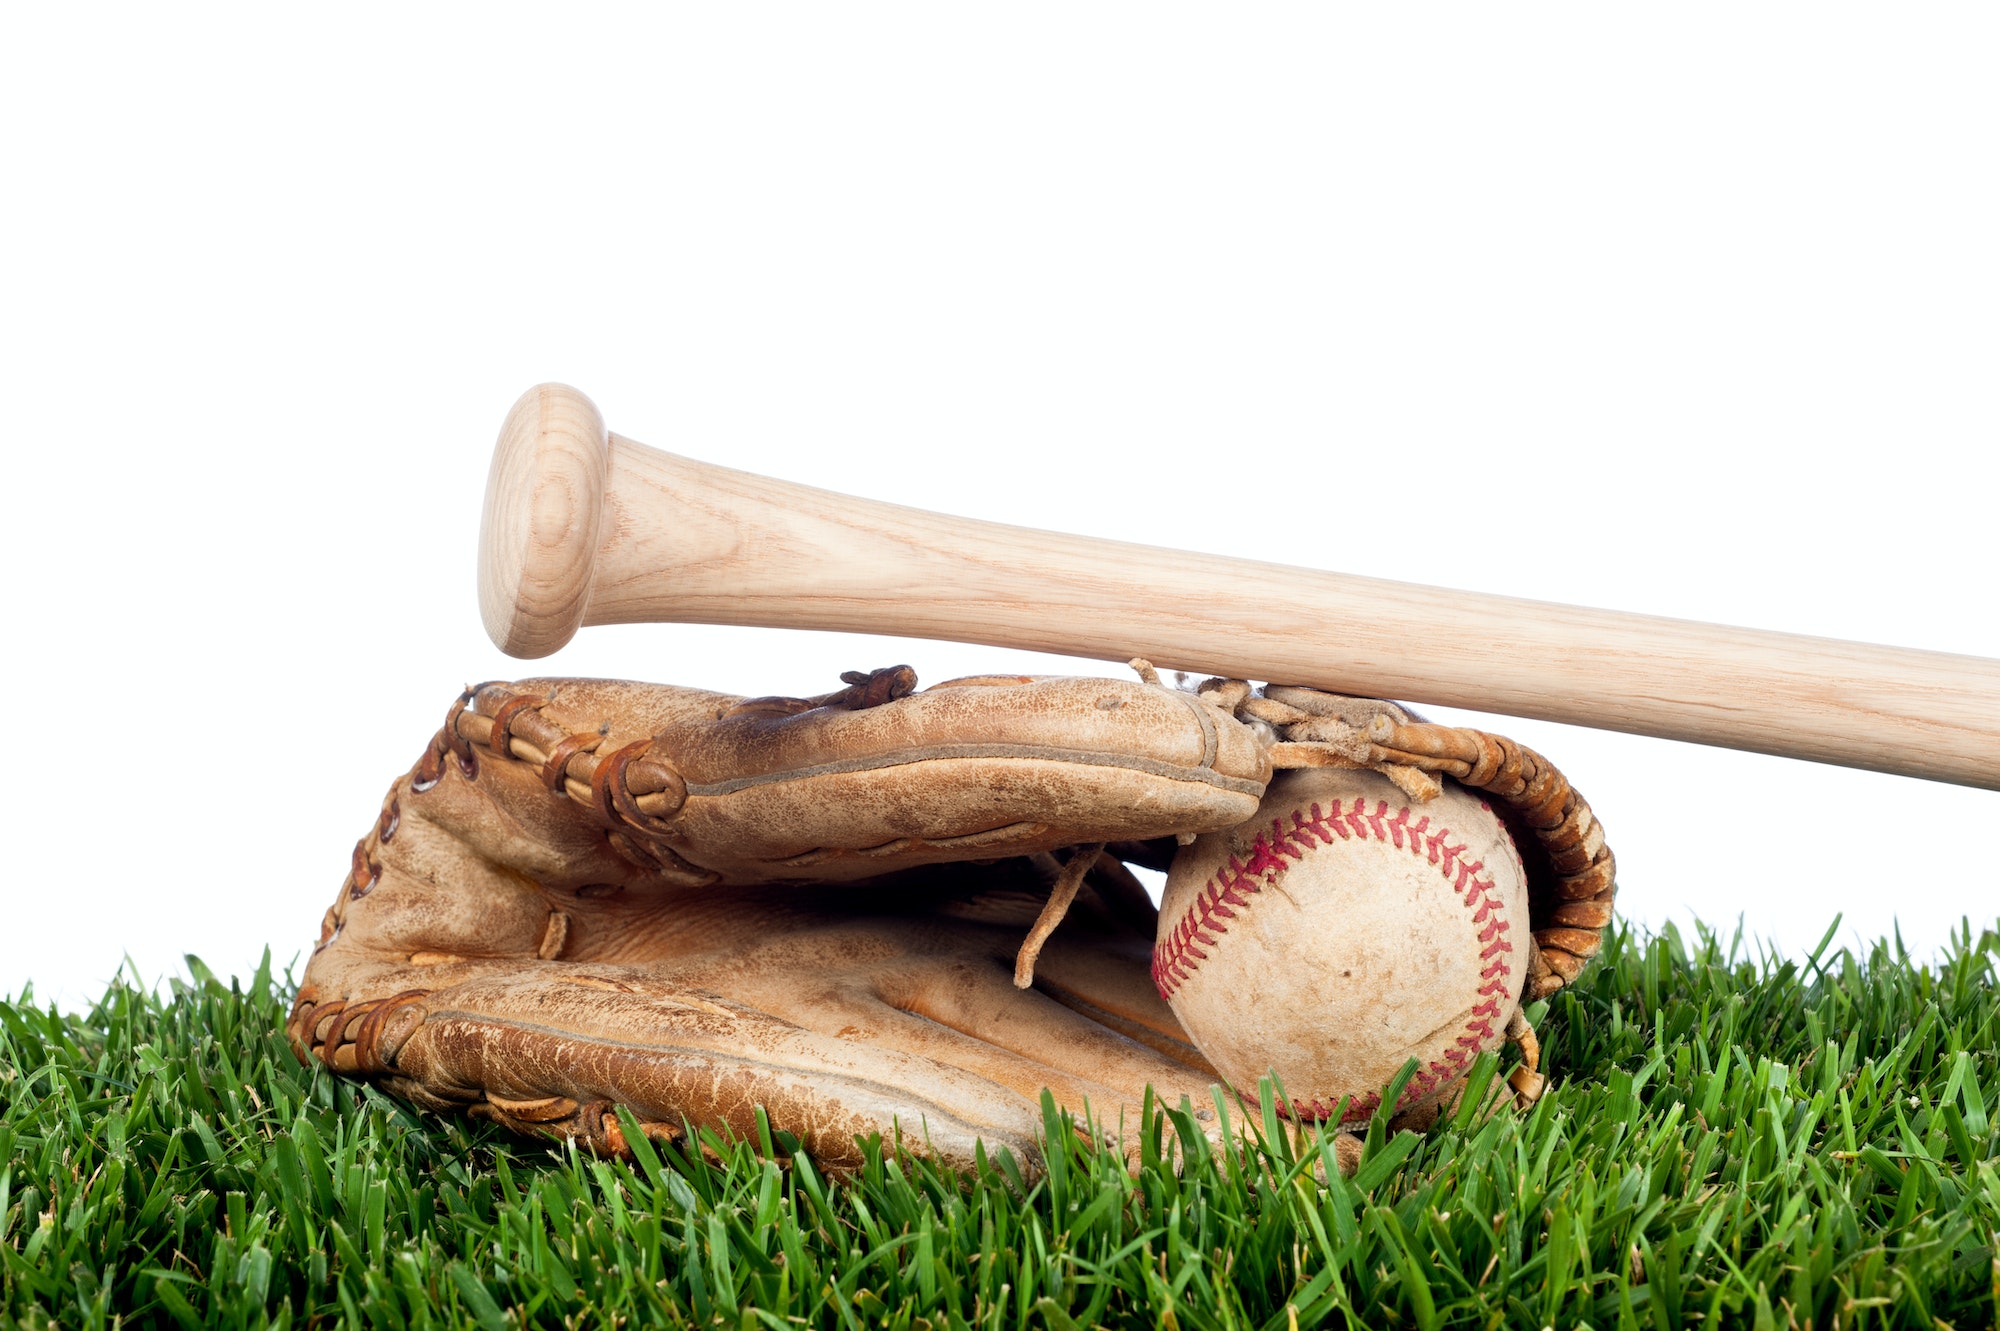 Looking for a fun summer activity? Try out for a travel baseball team near you!